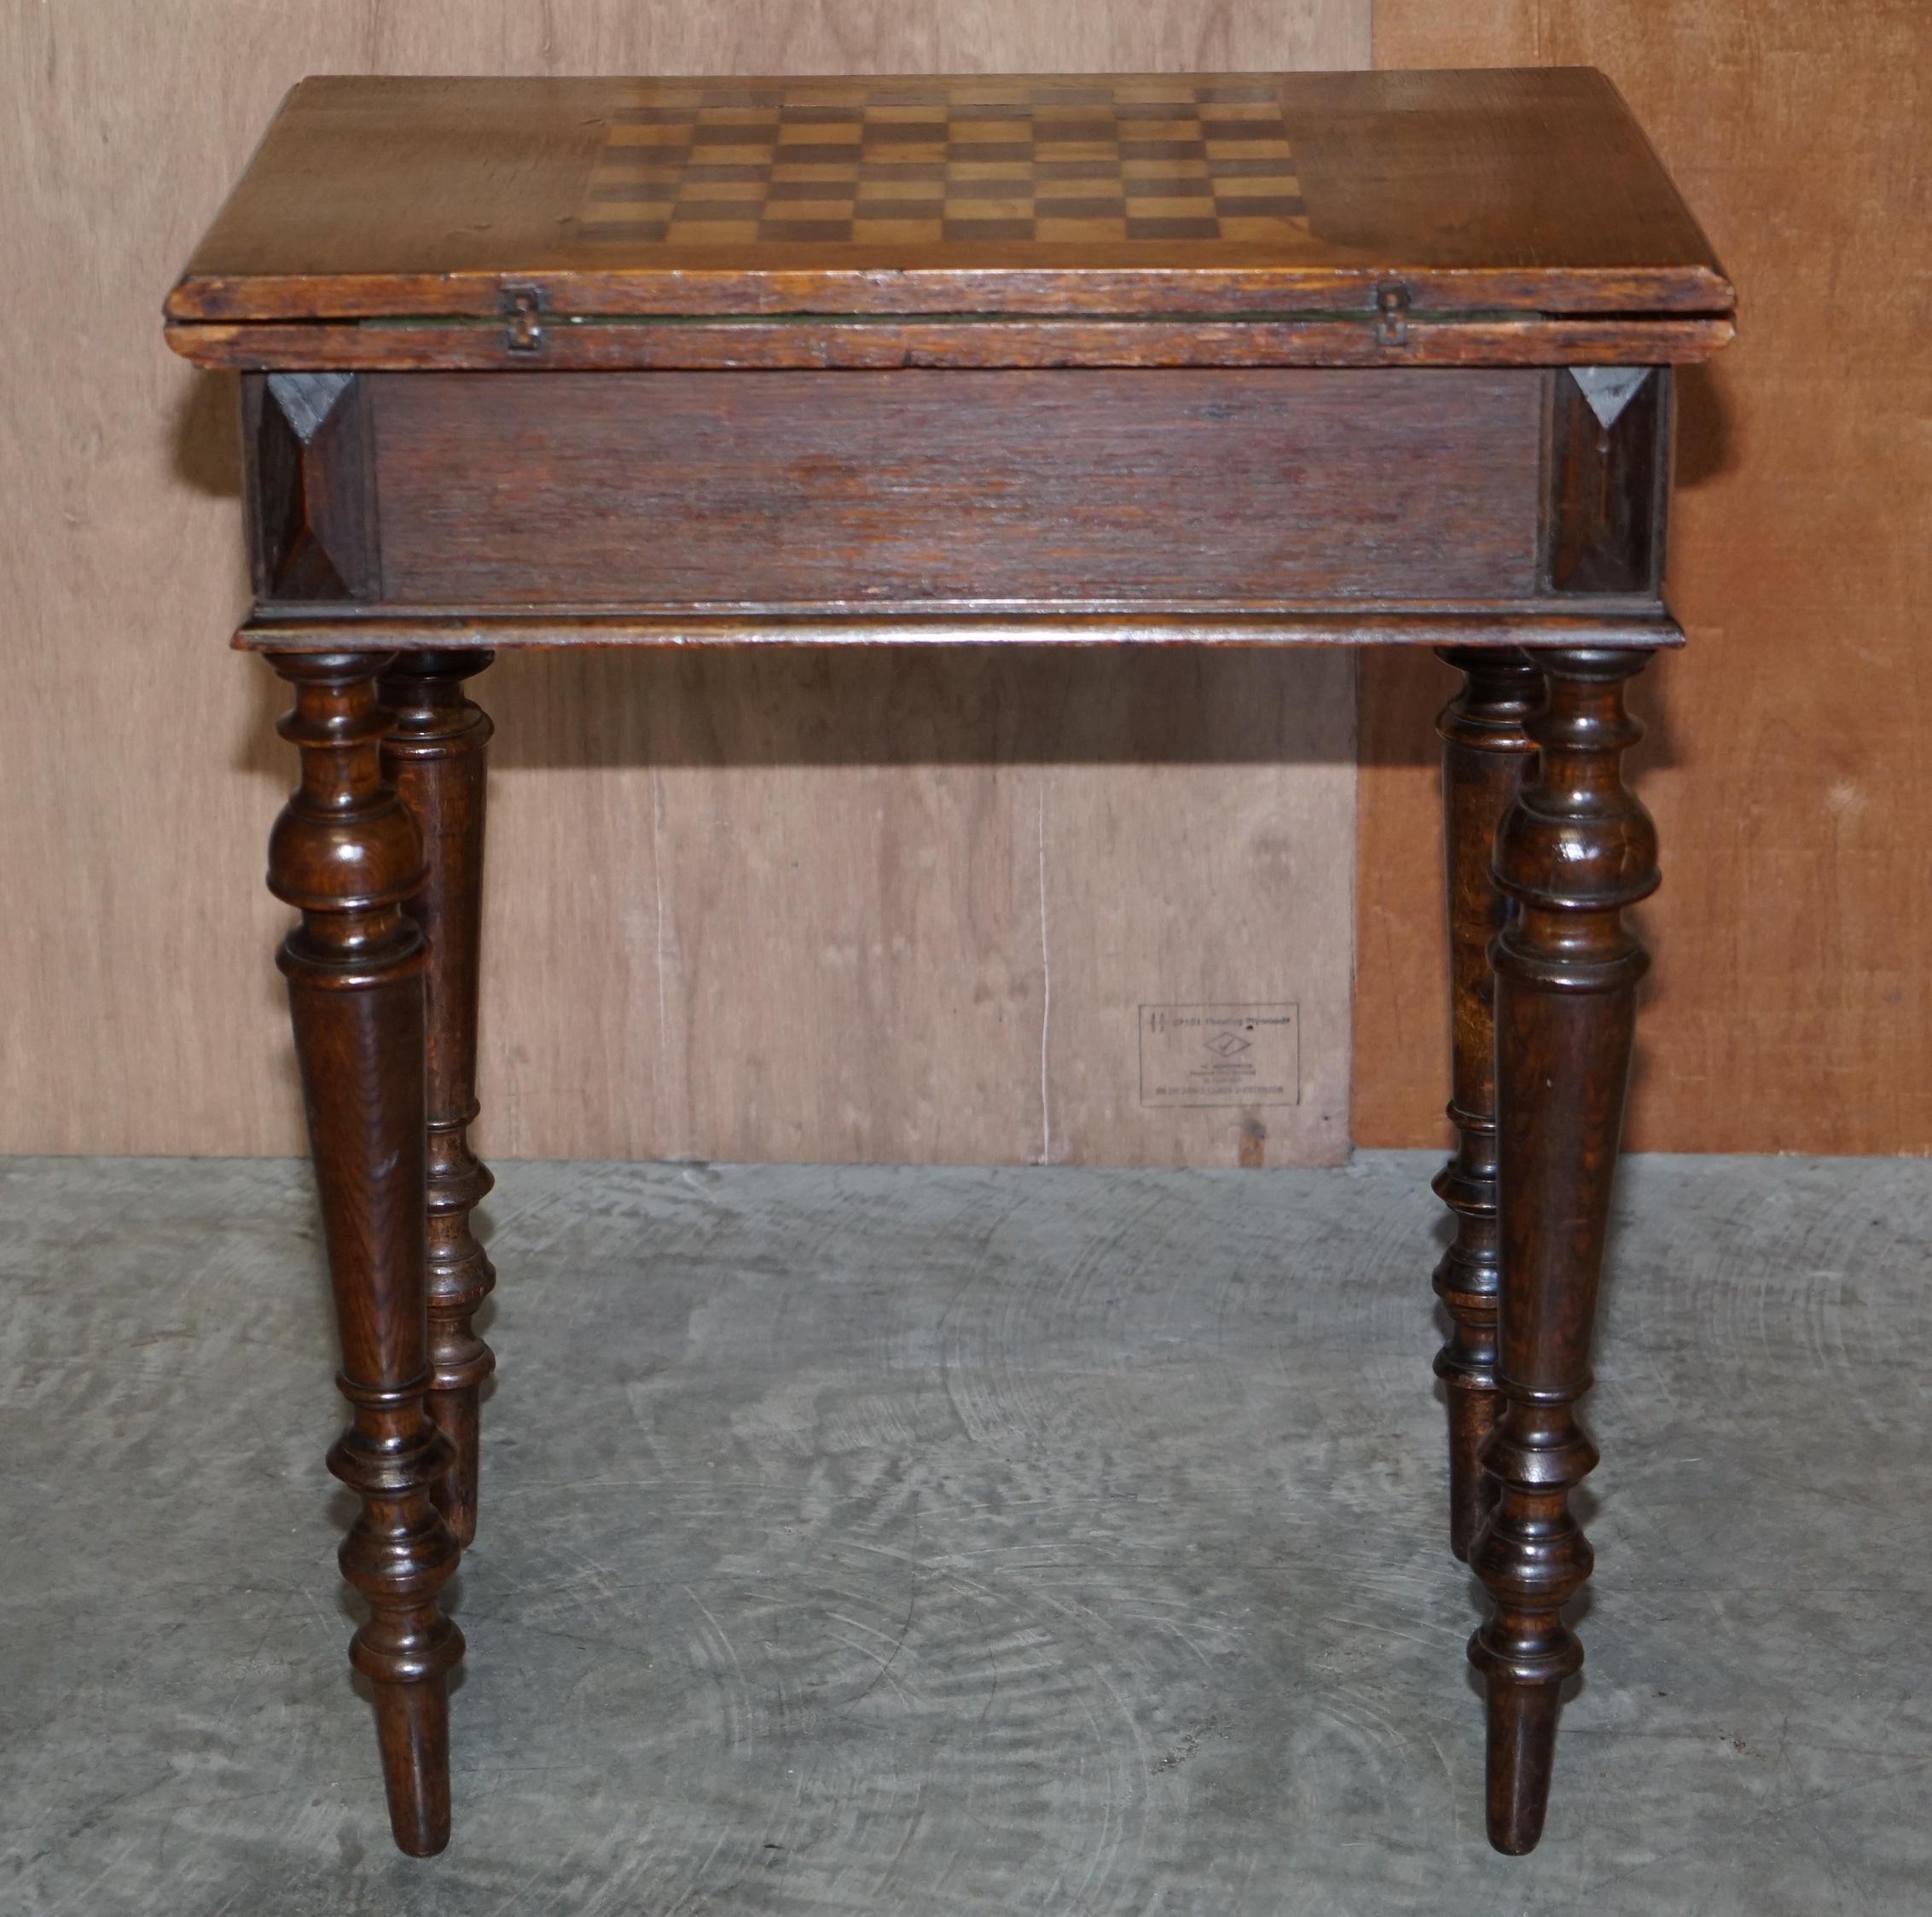 Lovely Antique Victrian circa 1880 Chess Games Table with Fold over Card Baize For Sale 9